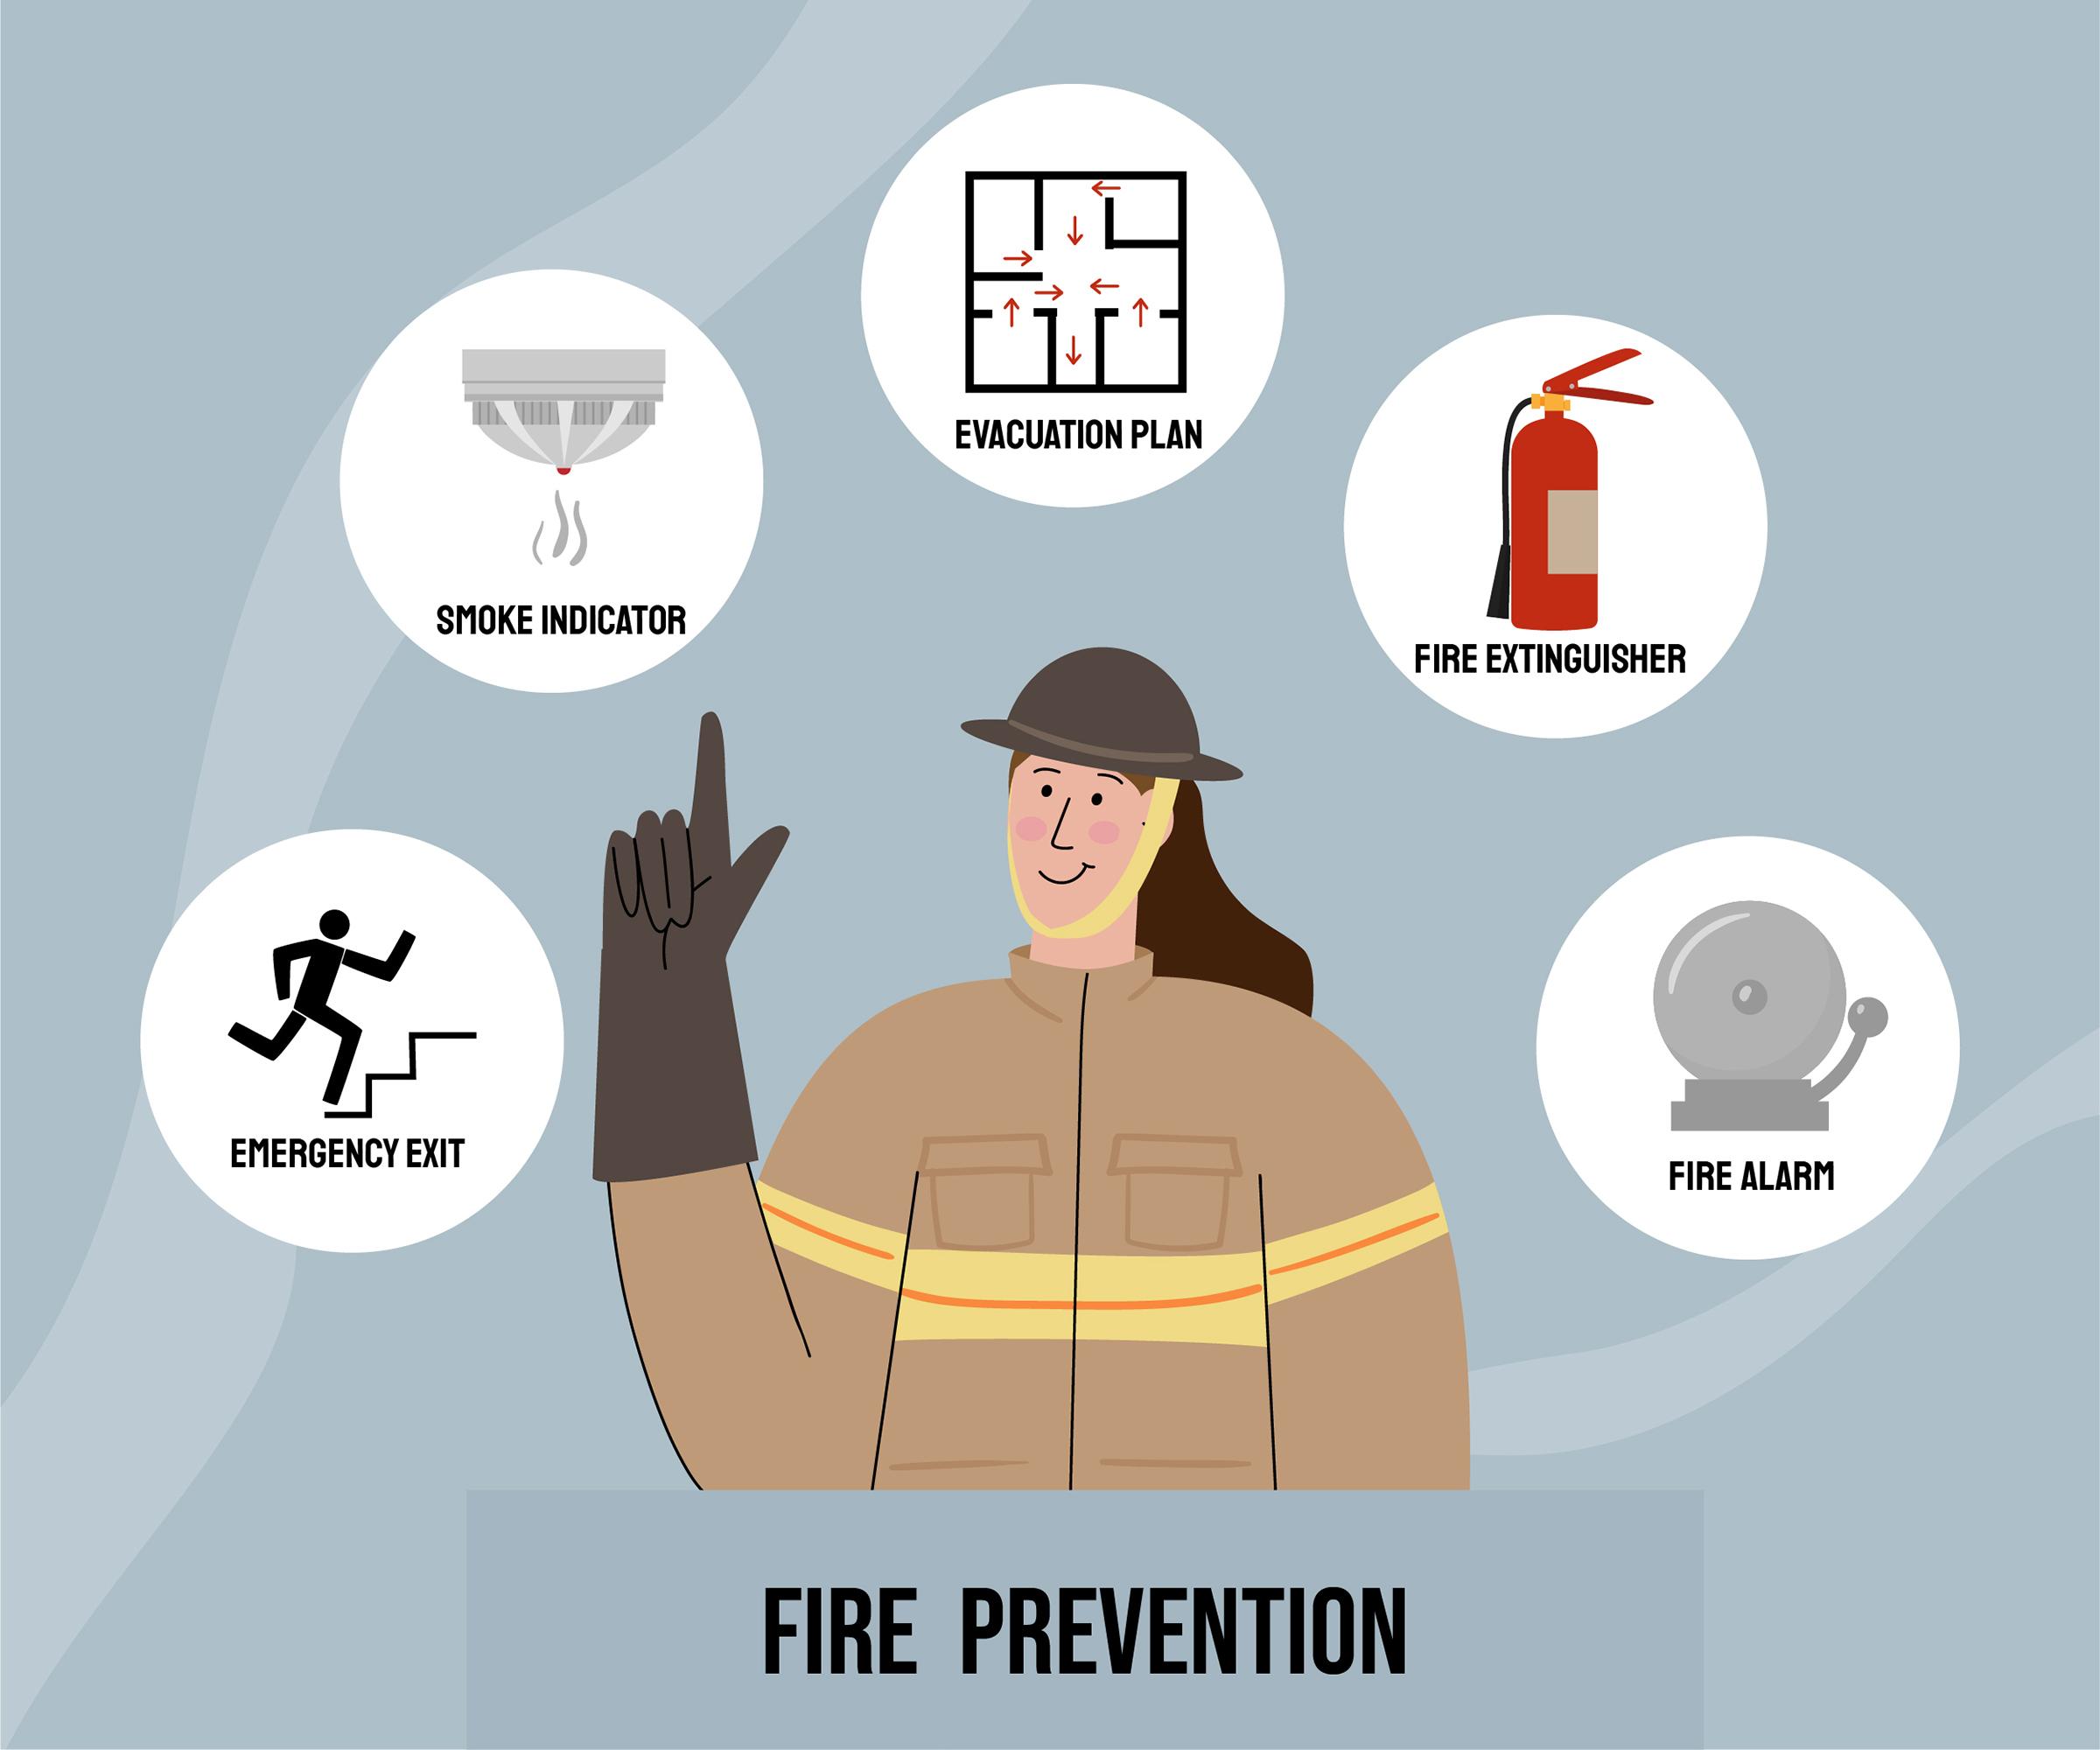 Top 10 Causes of Fires